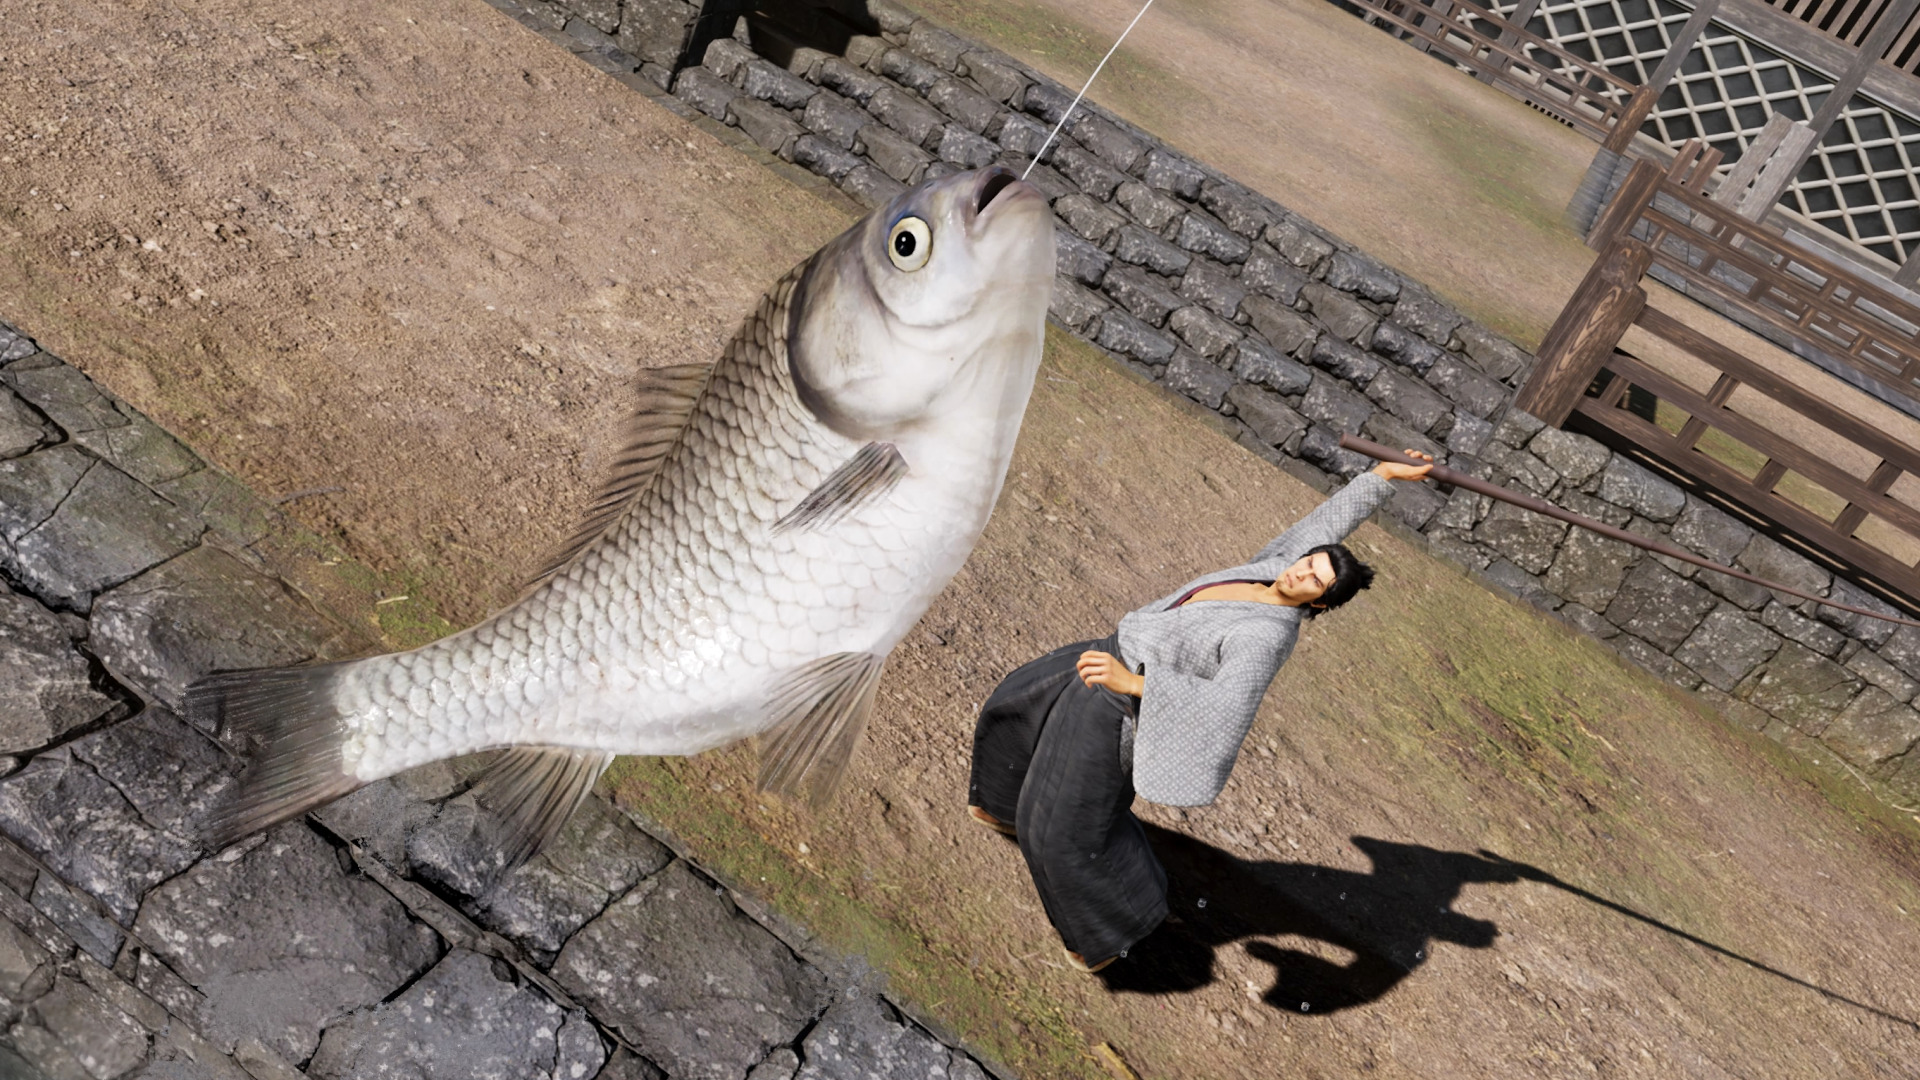 Like a Dragon Ishin review: Ryoma catches a fish in a fishing game